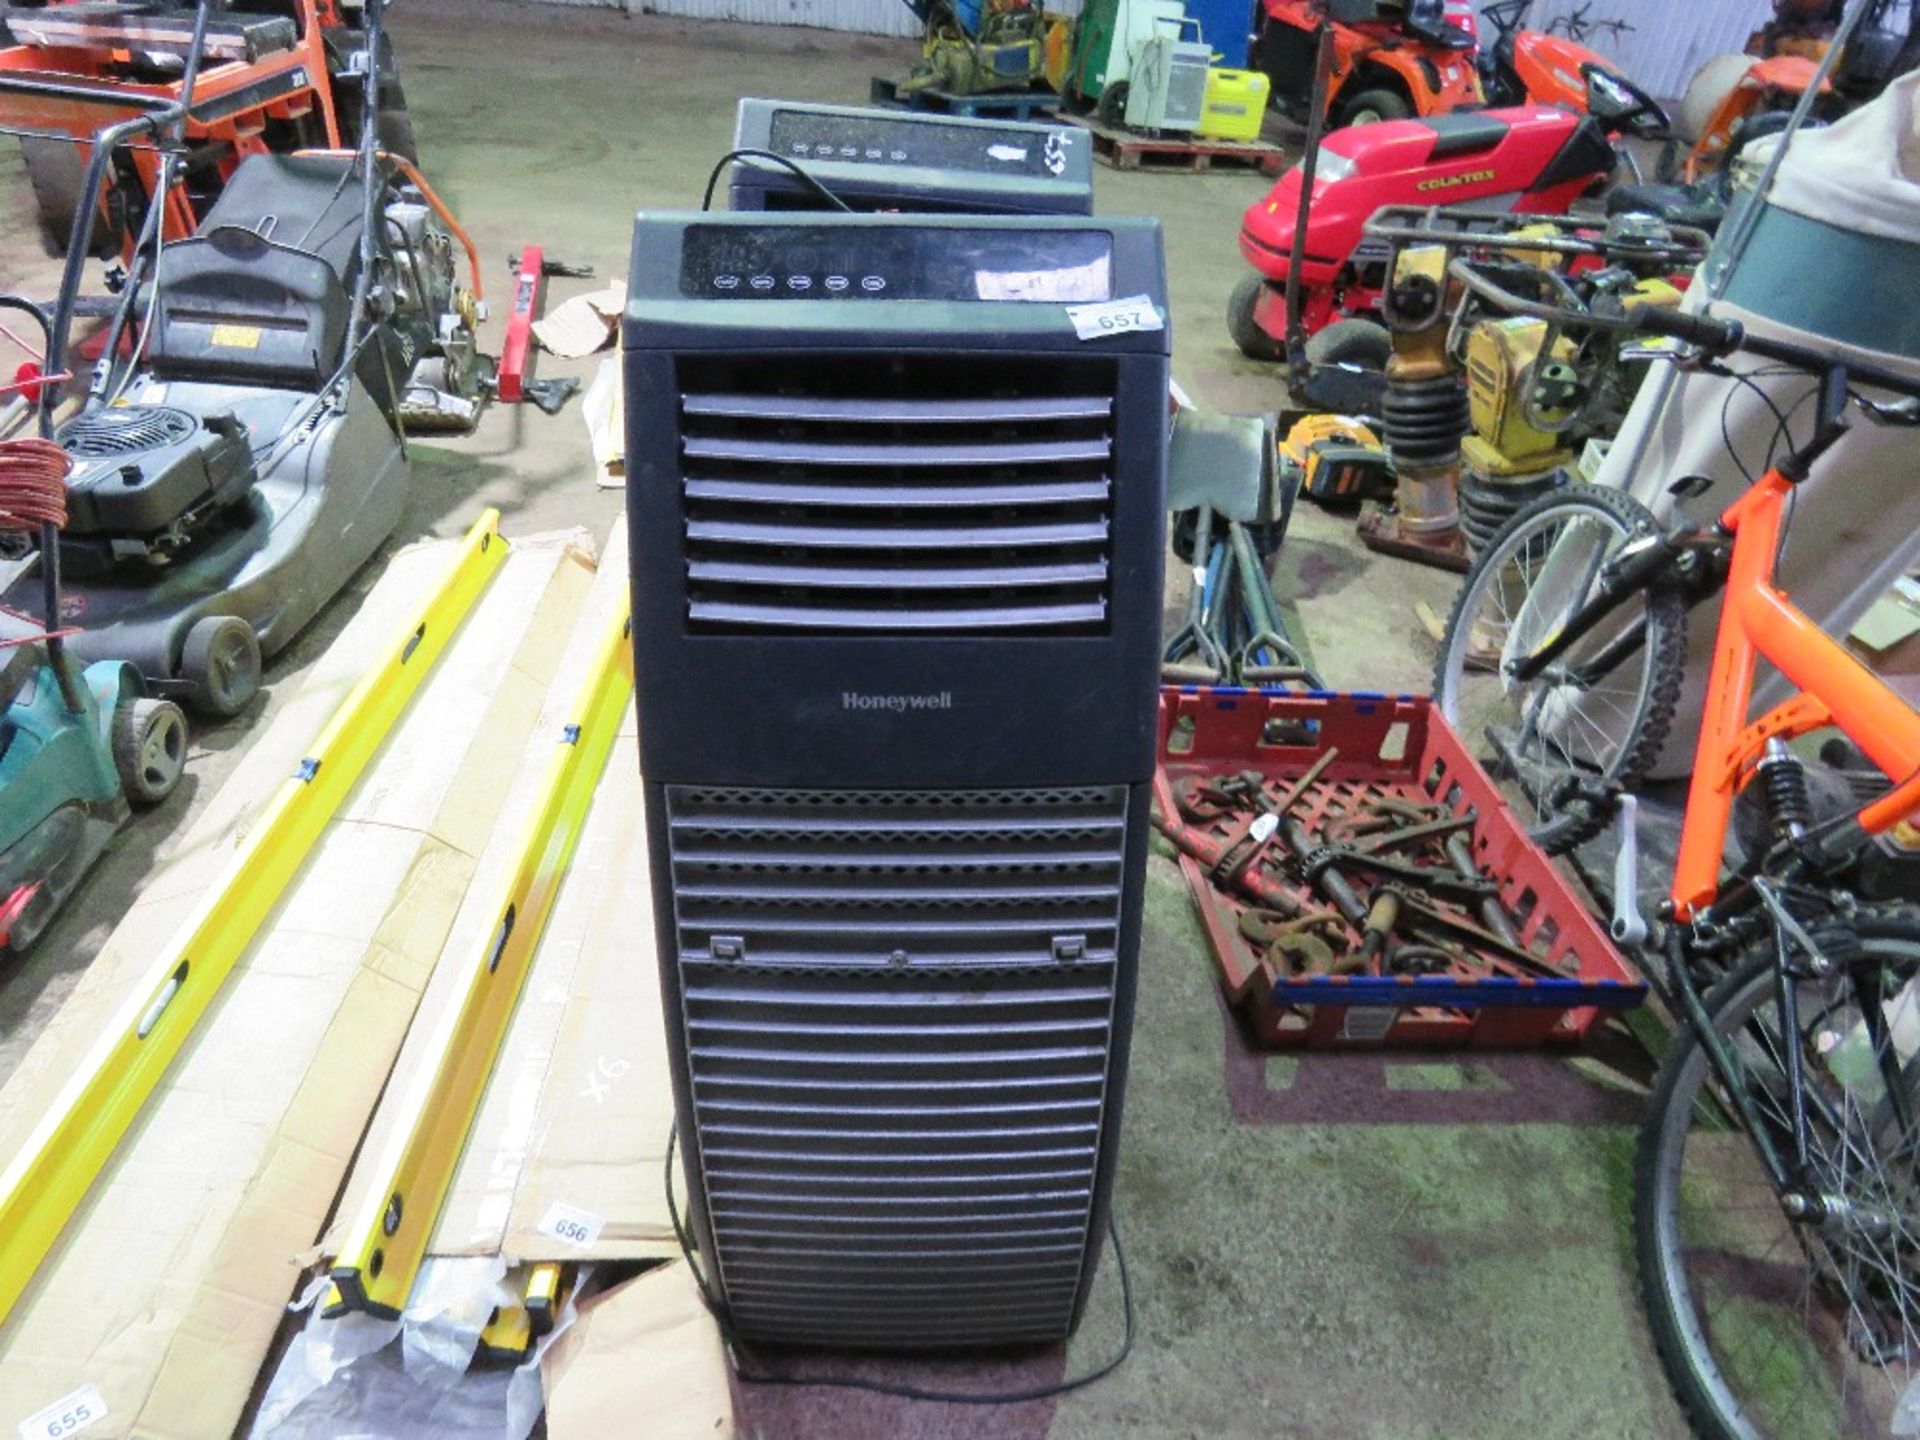 2 X HONEYWELL AIR CONDITIONERS/COOLERS. DIRECT FROM LOCAL COMPANY DUE TO DEPOT CLOSURE.